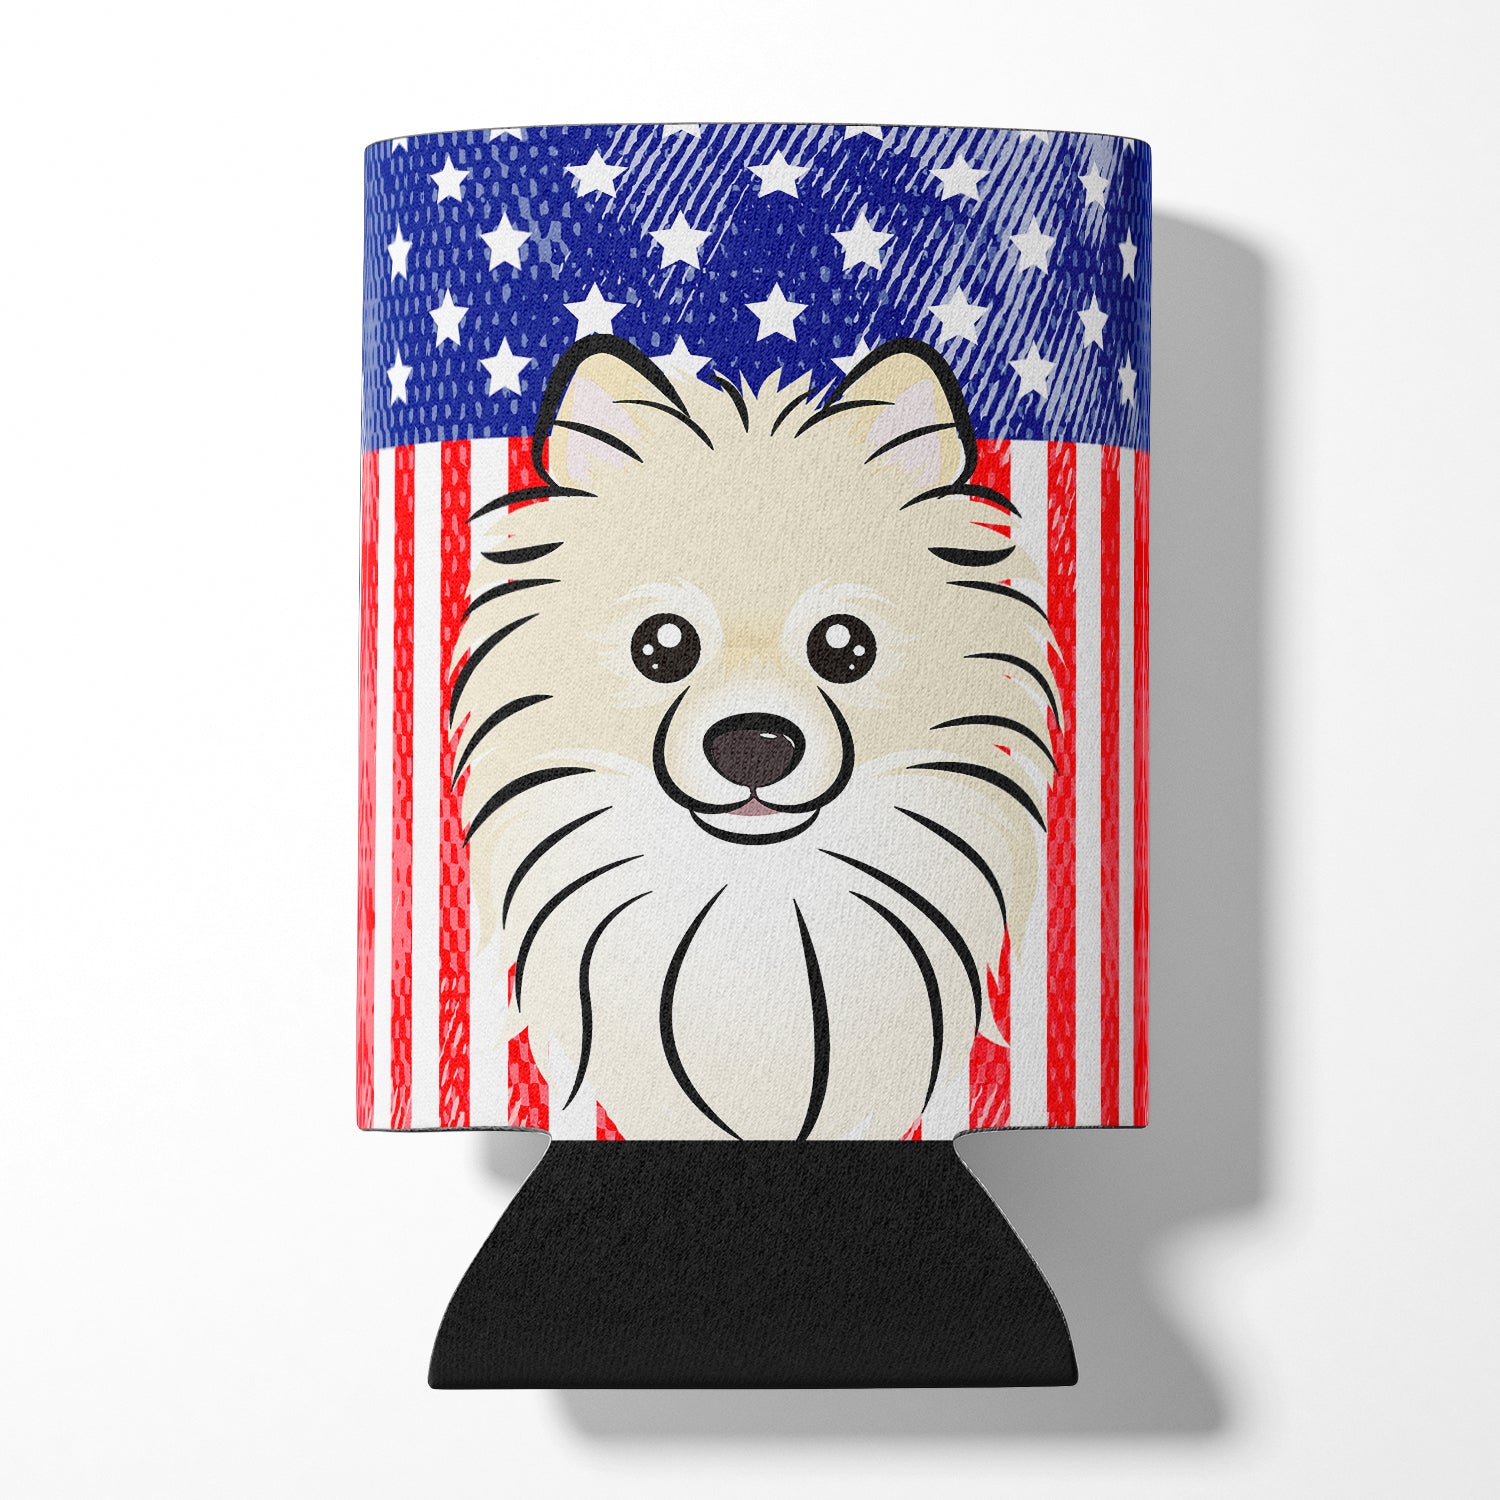 American Flag and Pomeranian Can or Bottle Hugger BB2137CC.